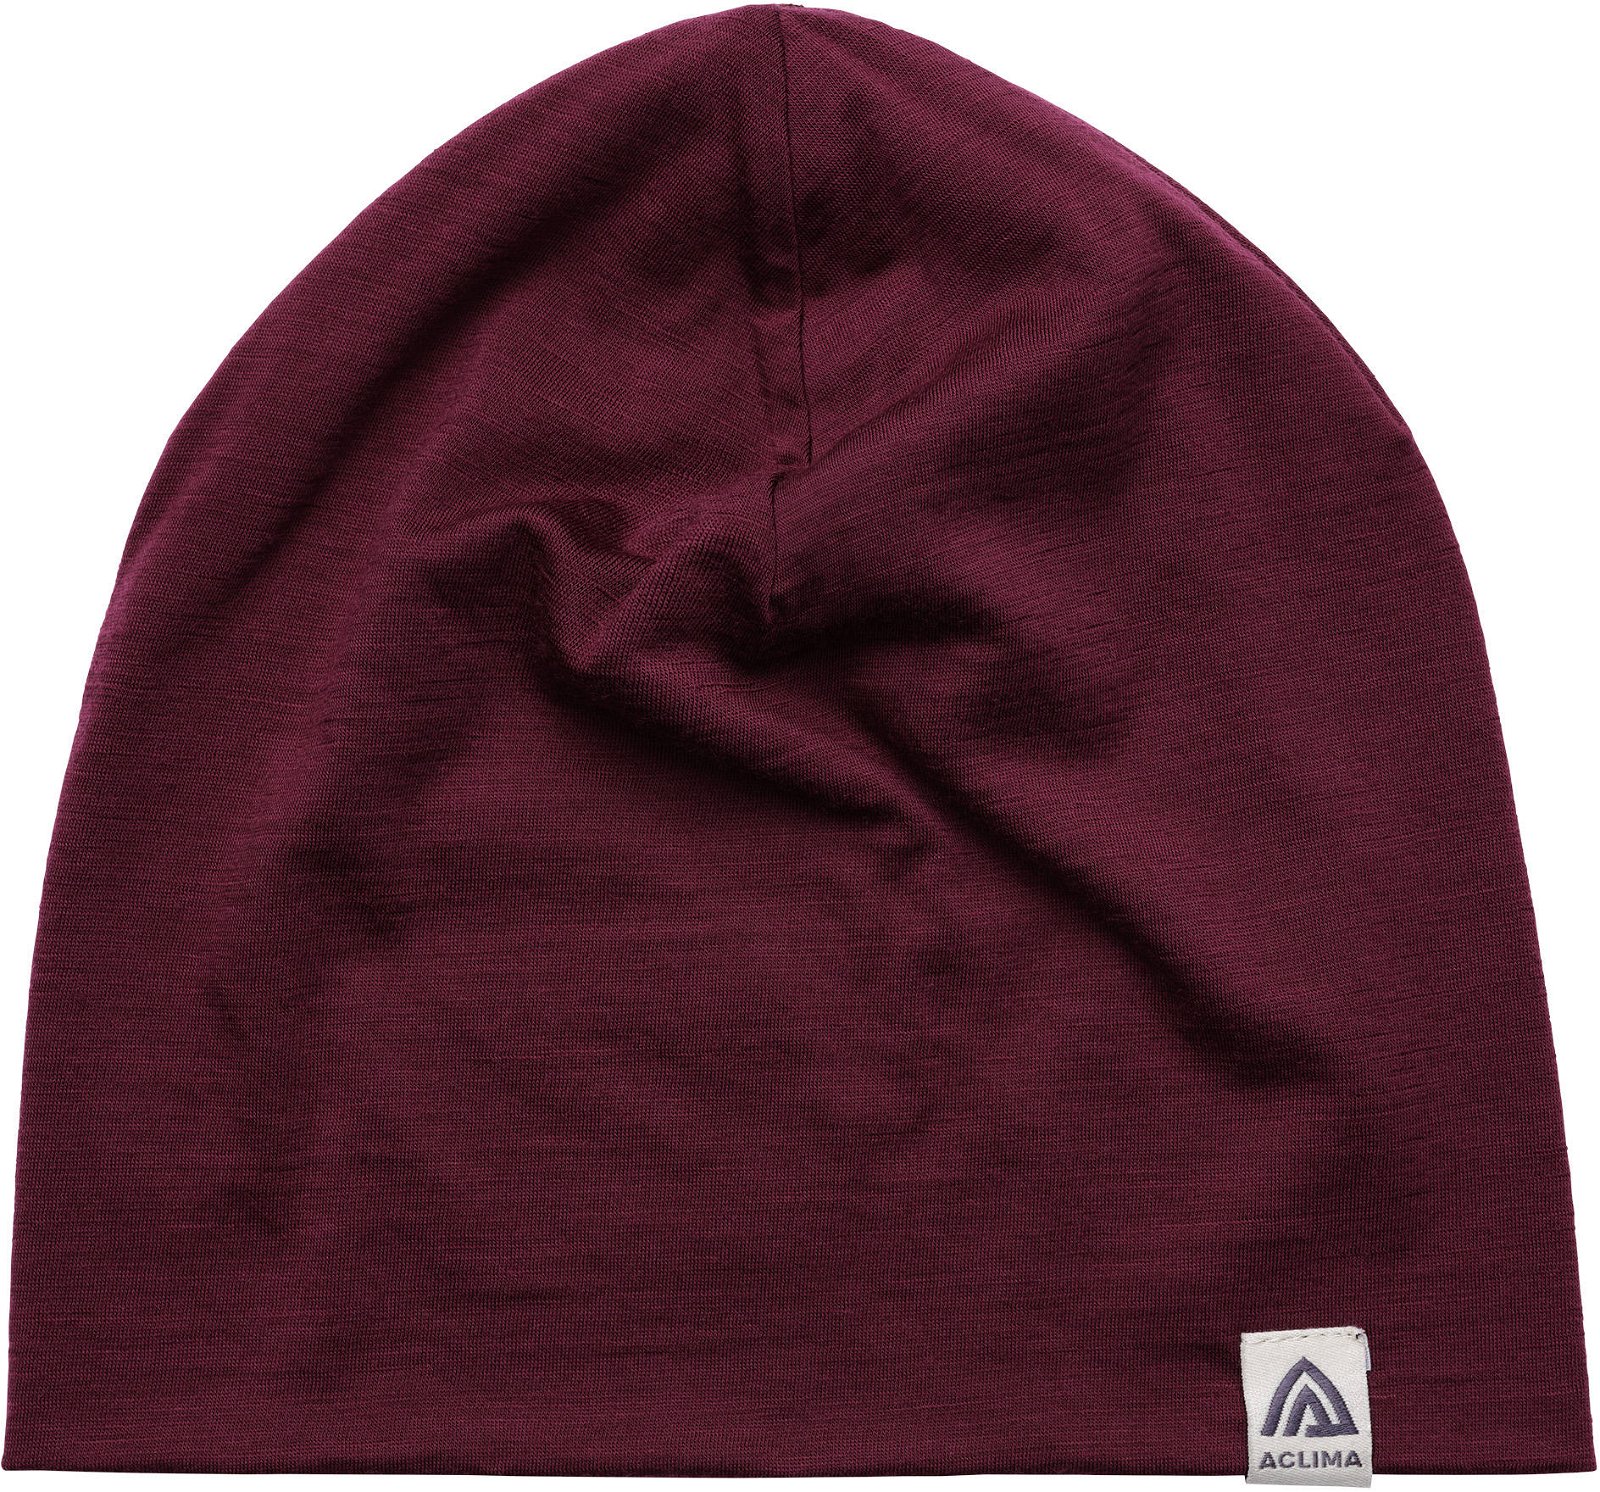 Aclima Lightwool Relaxed Beanie